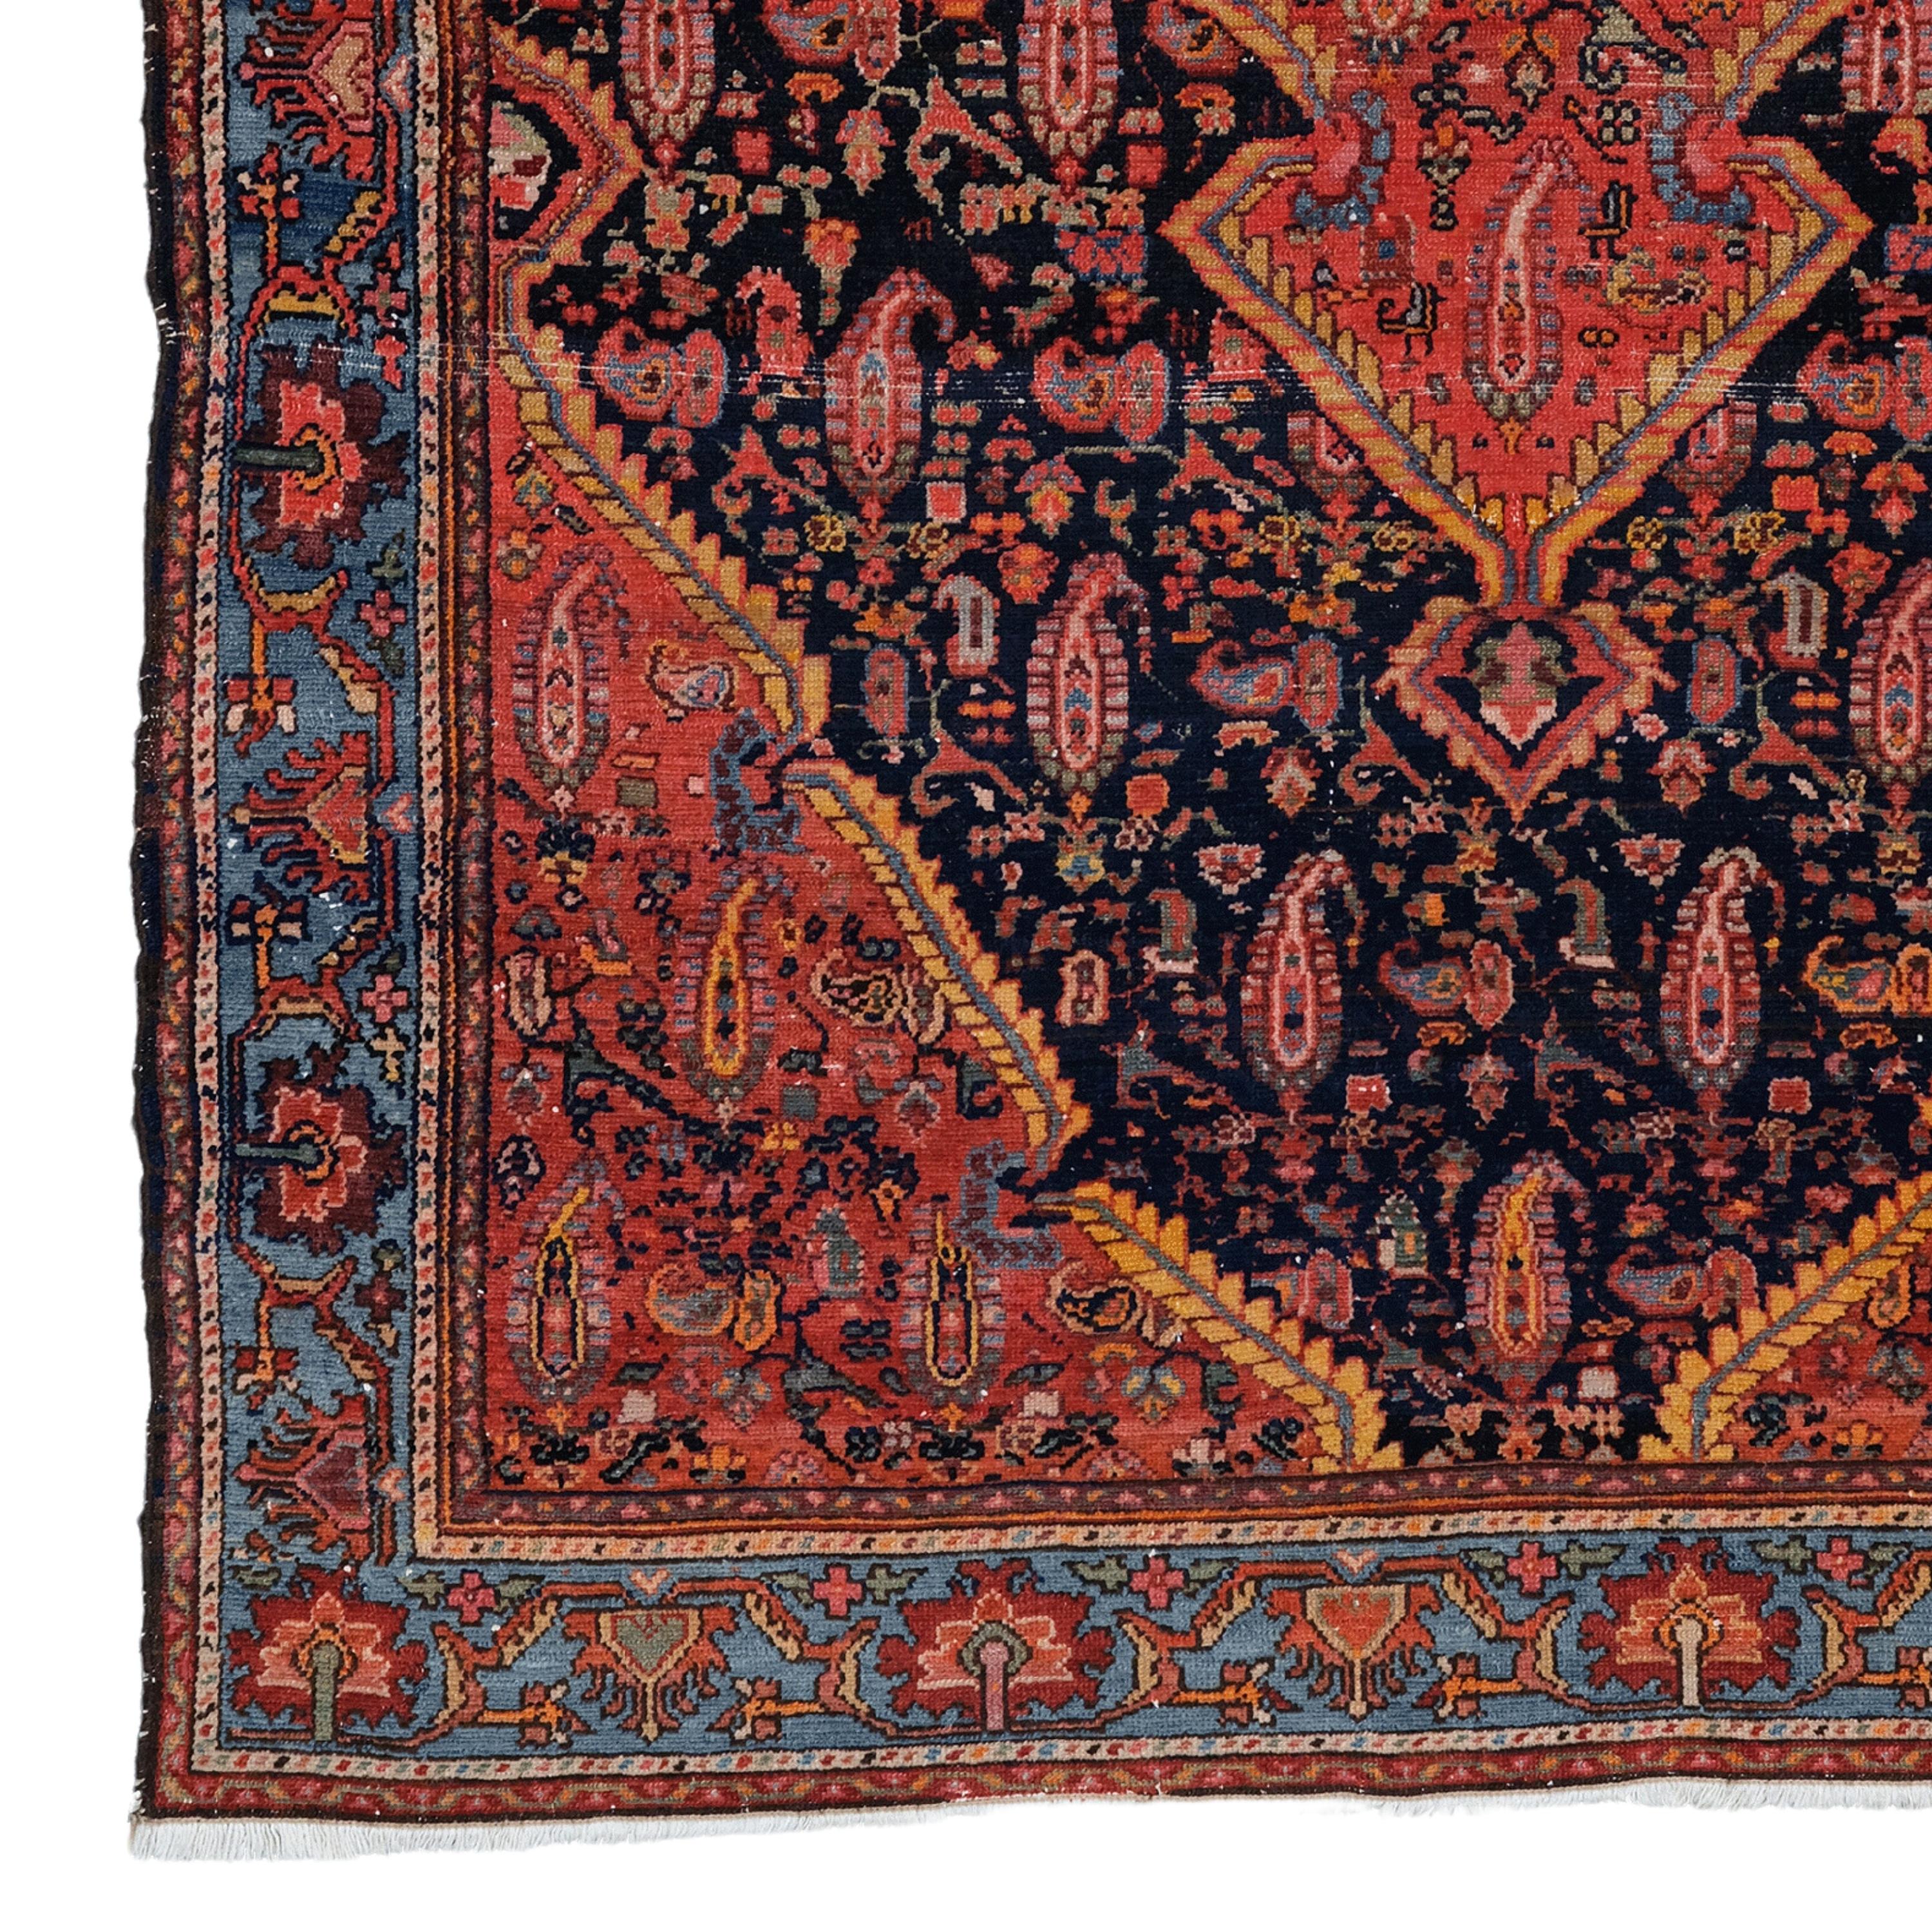 19th Century Melayer Rug

This extraordinary carpet will fascinate you with its intricate designs and vibrant colors that reflect the rich history and craftsmanship of the period. Each stitch tells the story of skilled craftsmen who masterfully